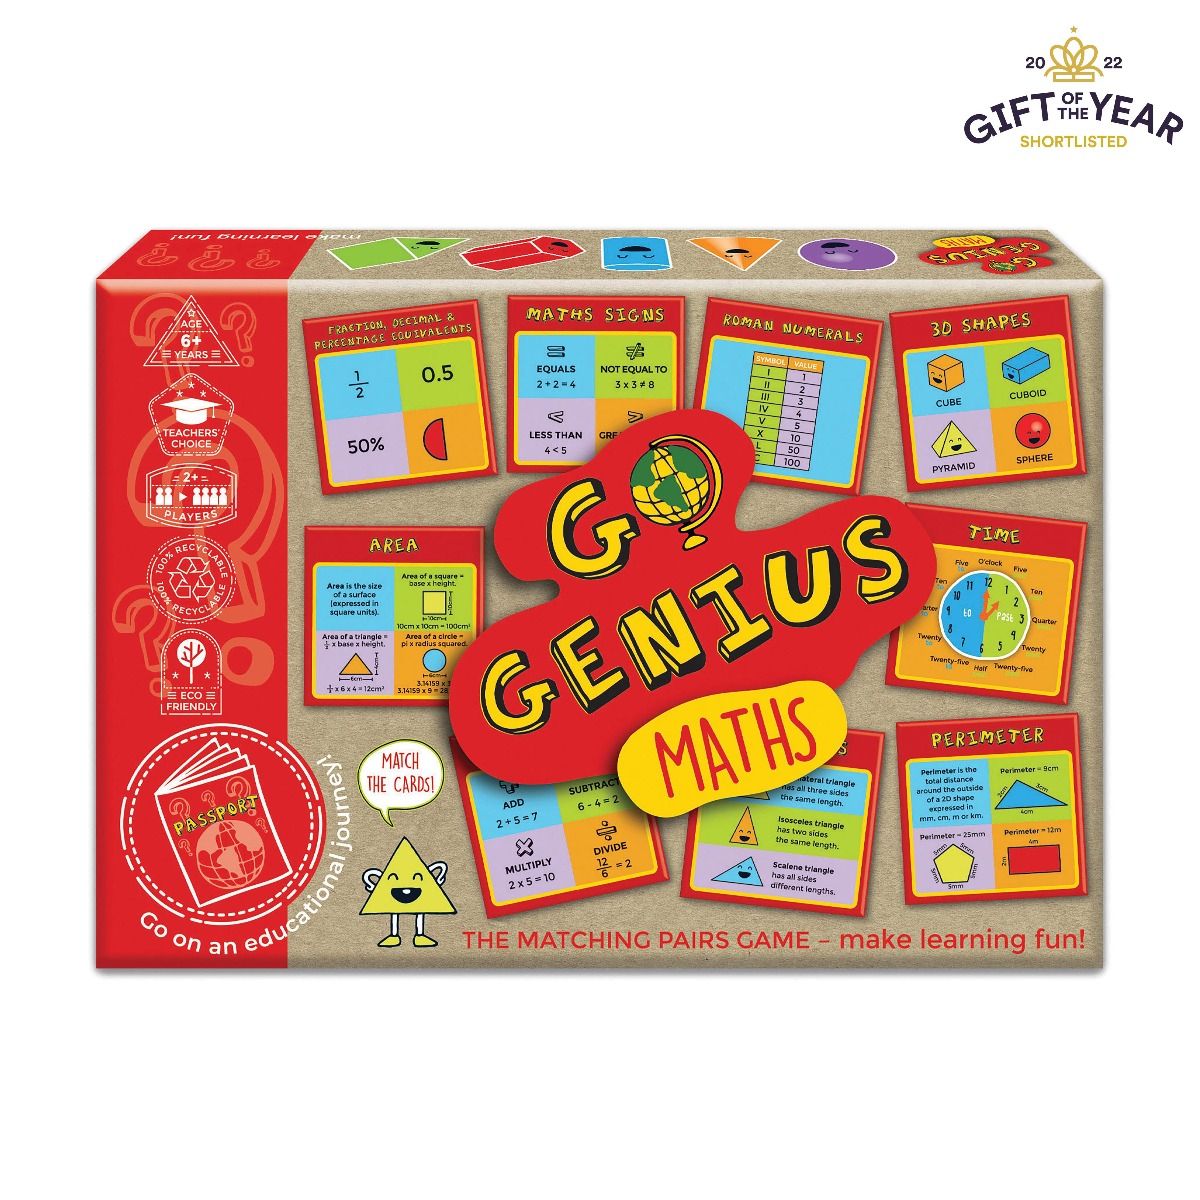 Go Genius Maths - The Matching Pairs Game - Gifts R Us